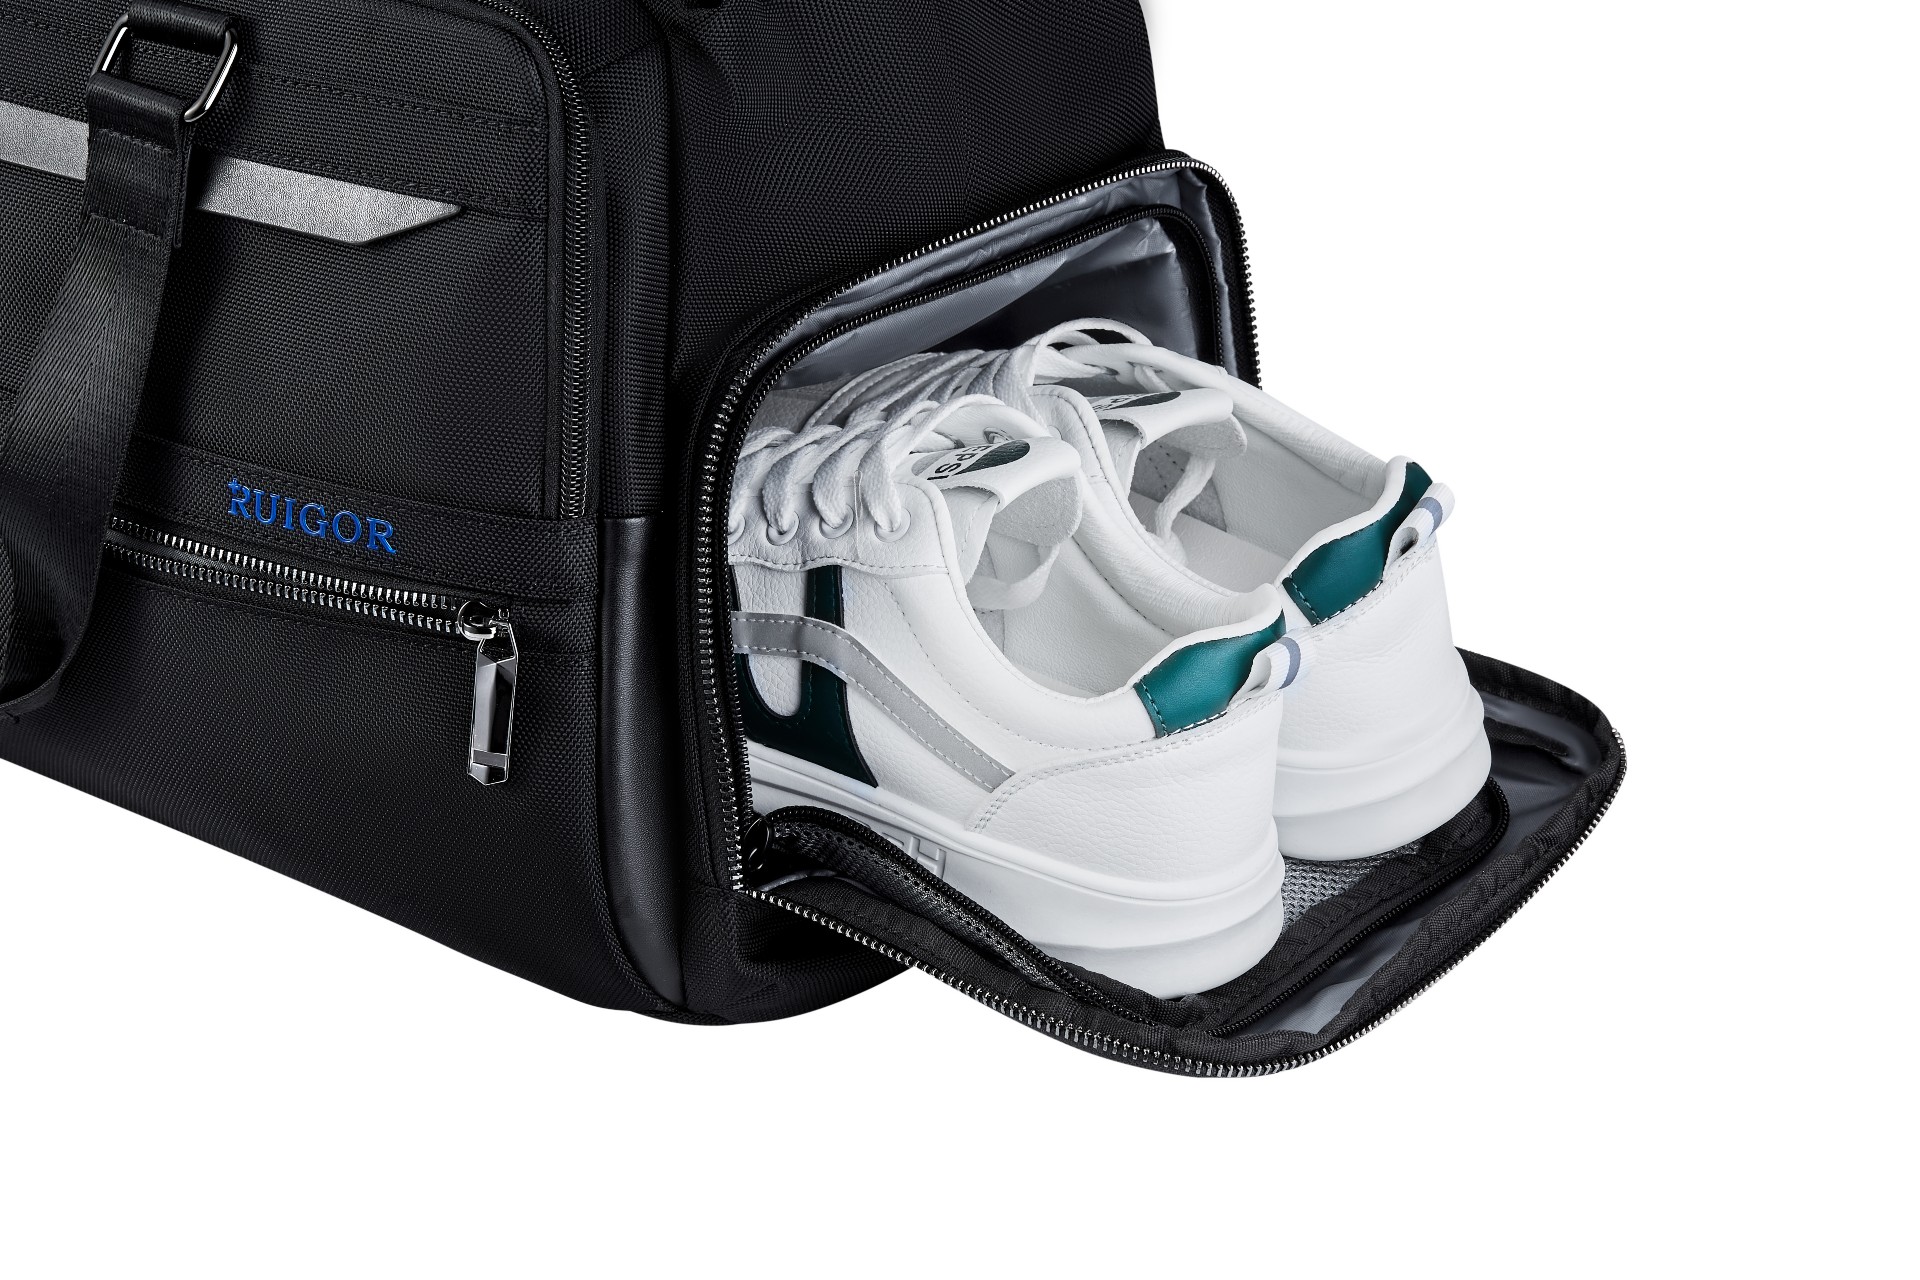 15 Gym Bag Essentials For A Successful Workout – CrepStars